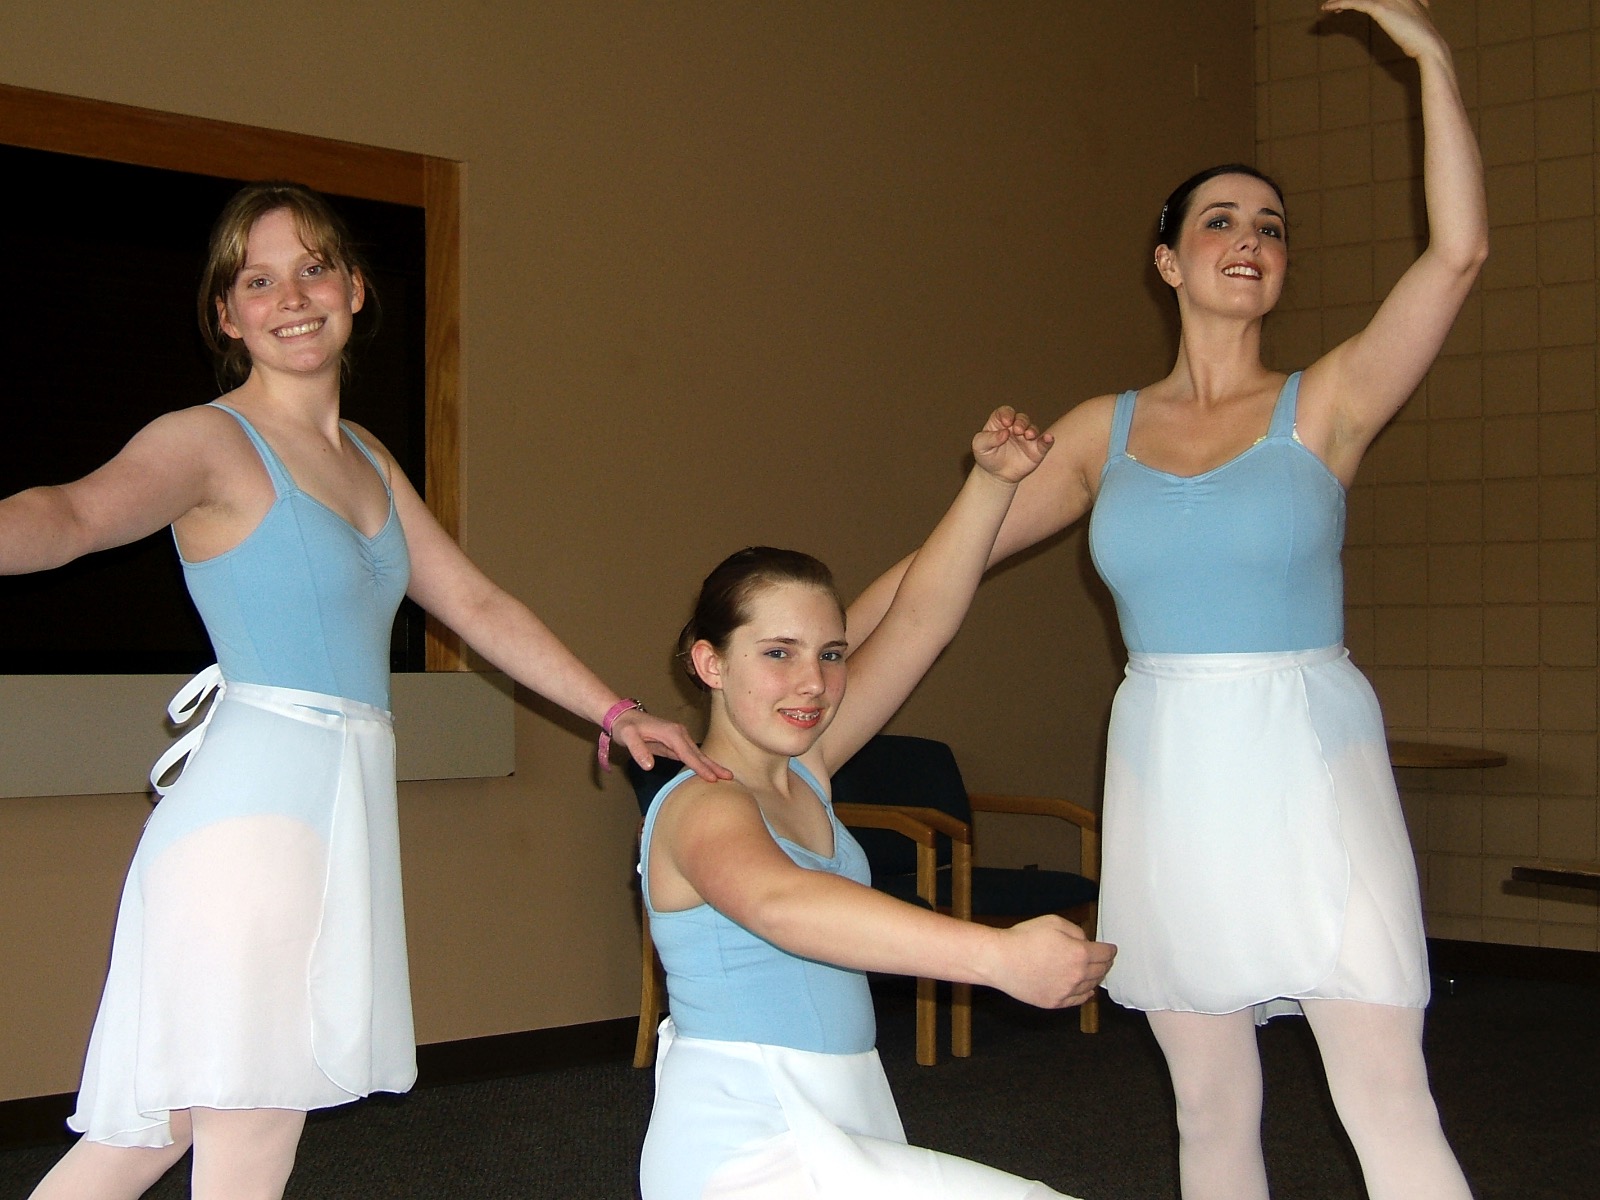 Rhiannon in powder blue ballet attire posing with two similarly dressed teens